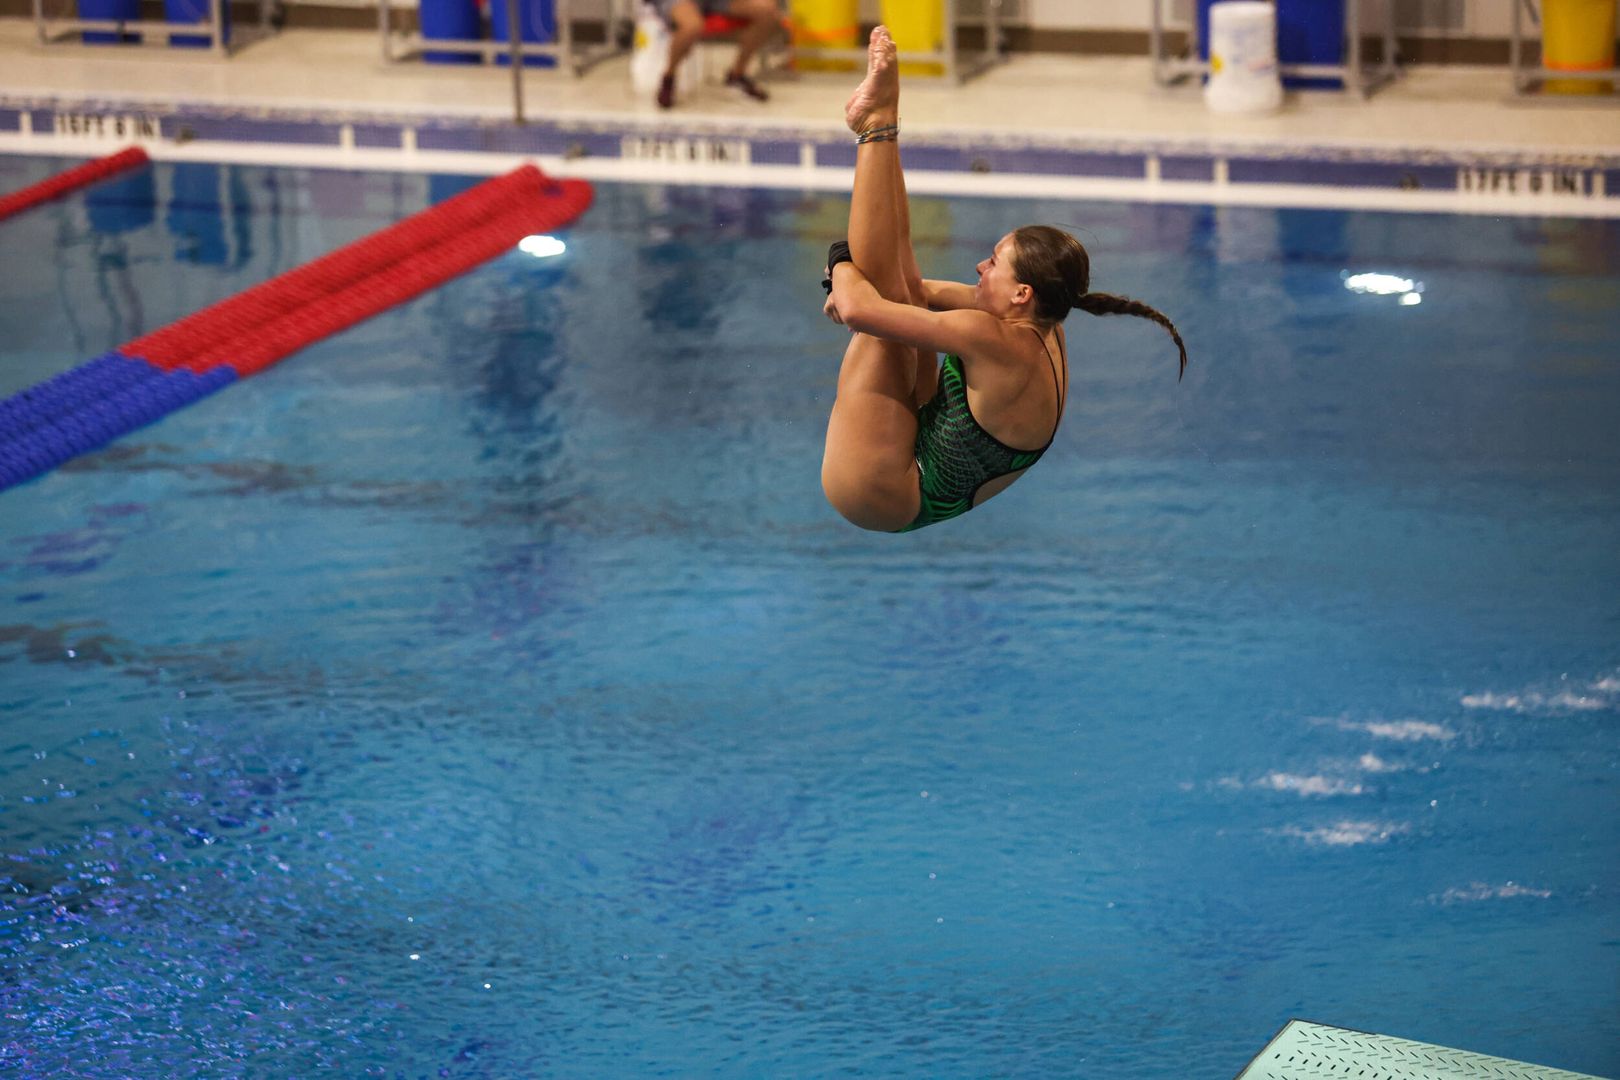 Vallée Named ACC Women's Diver of the Week